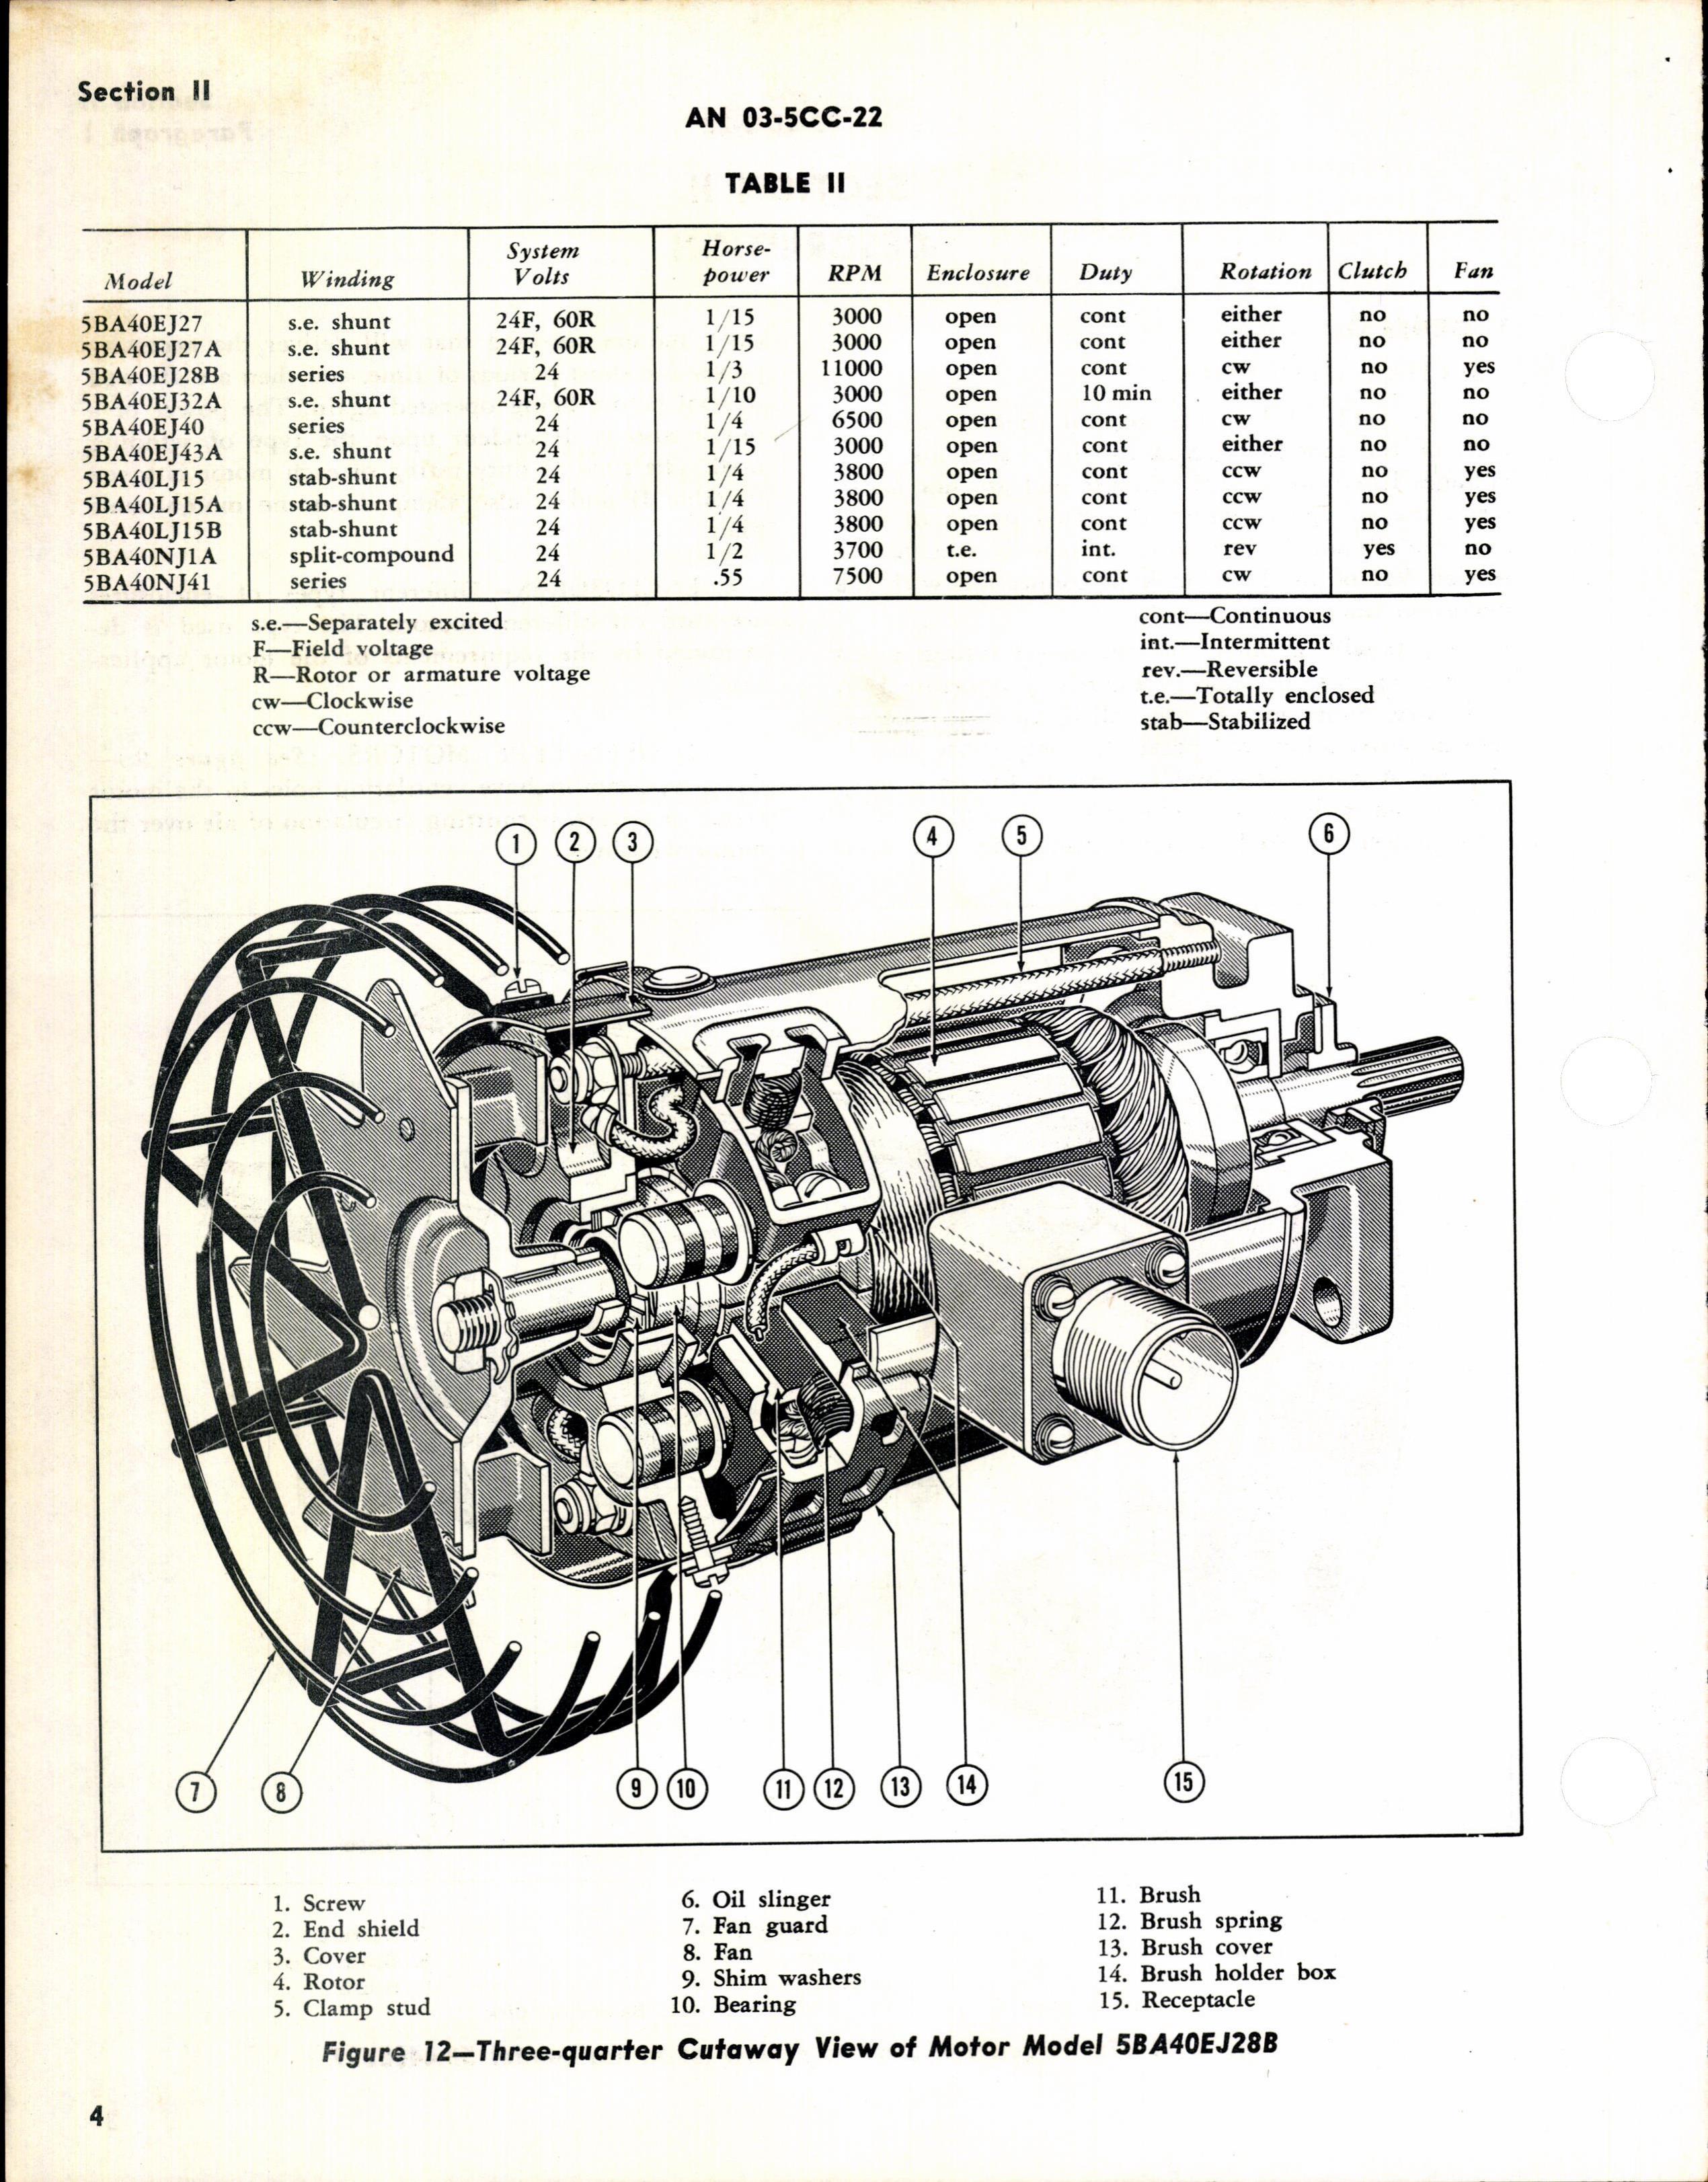 Sample page 6 from AirCorps Library document: HB of Instructions with Parts Catalog for Model 5BA40 Electric Motors